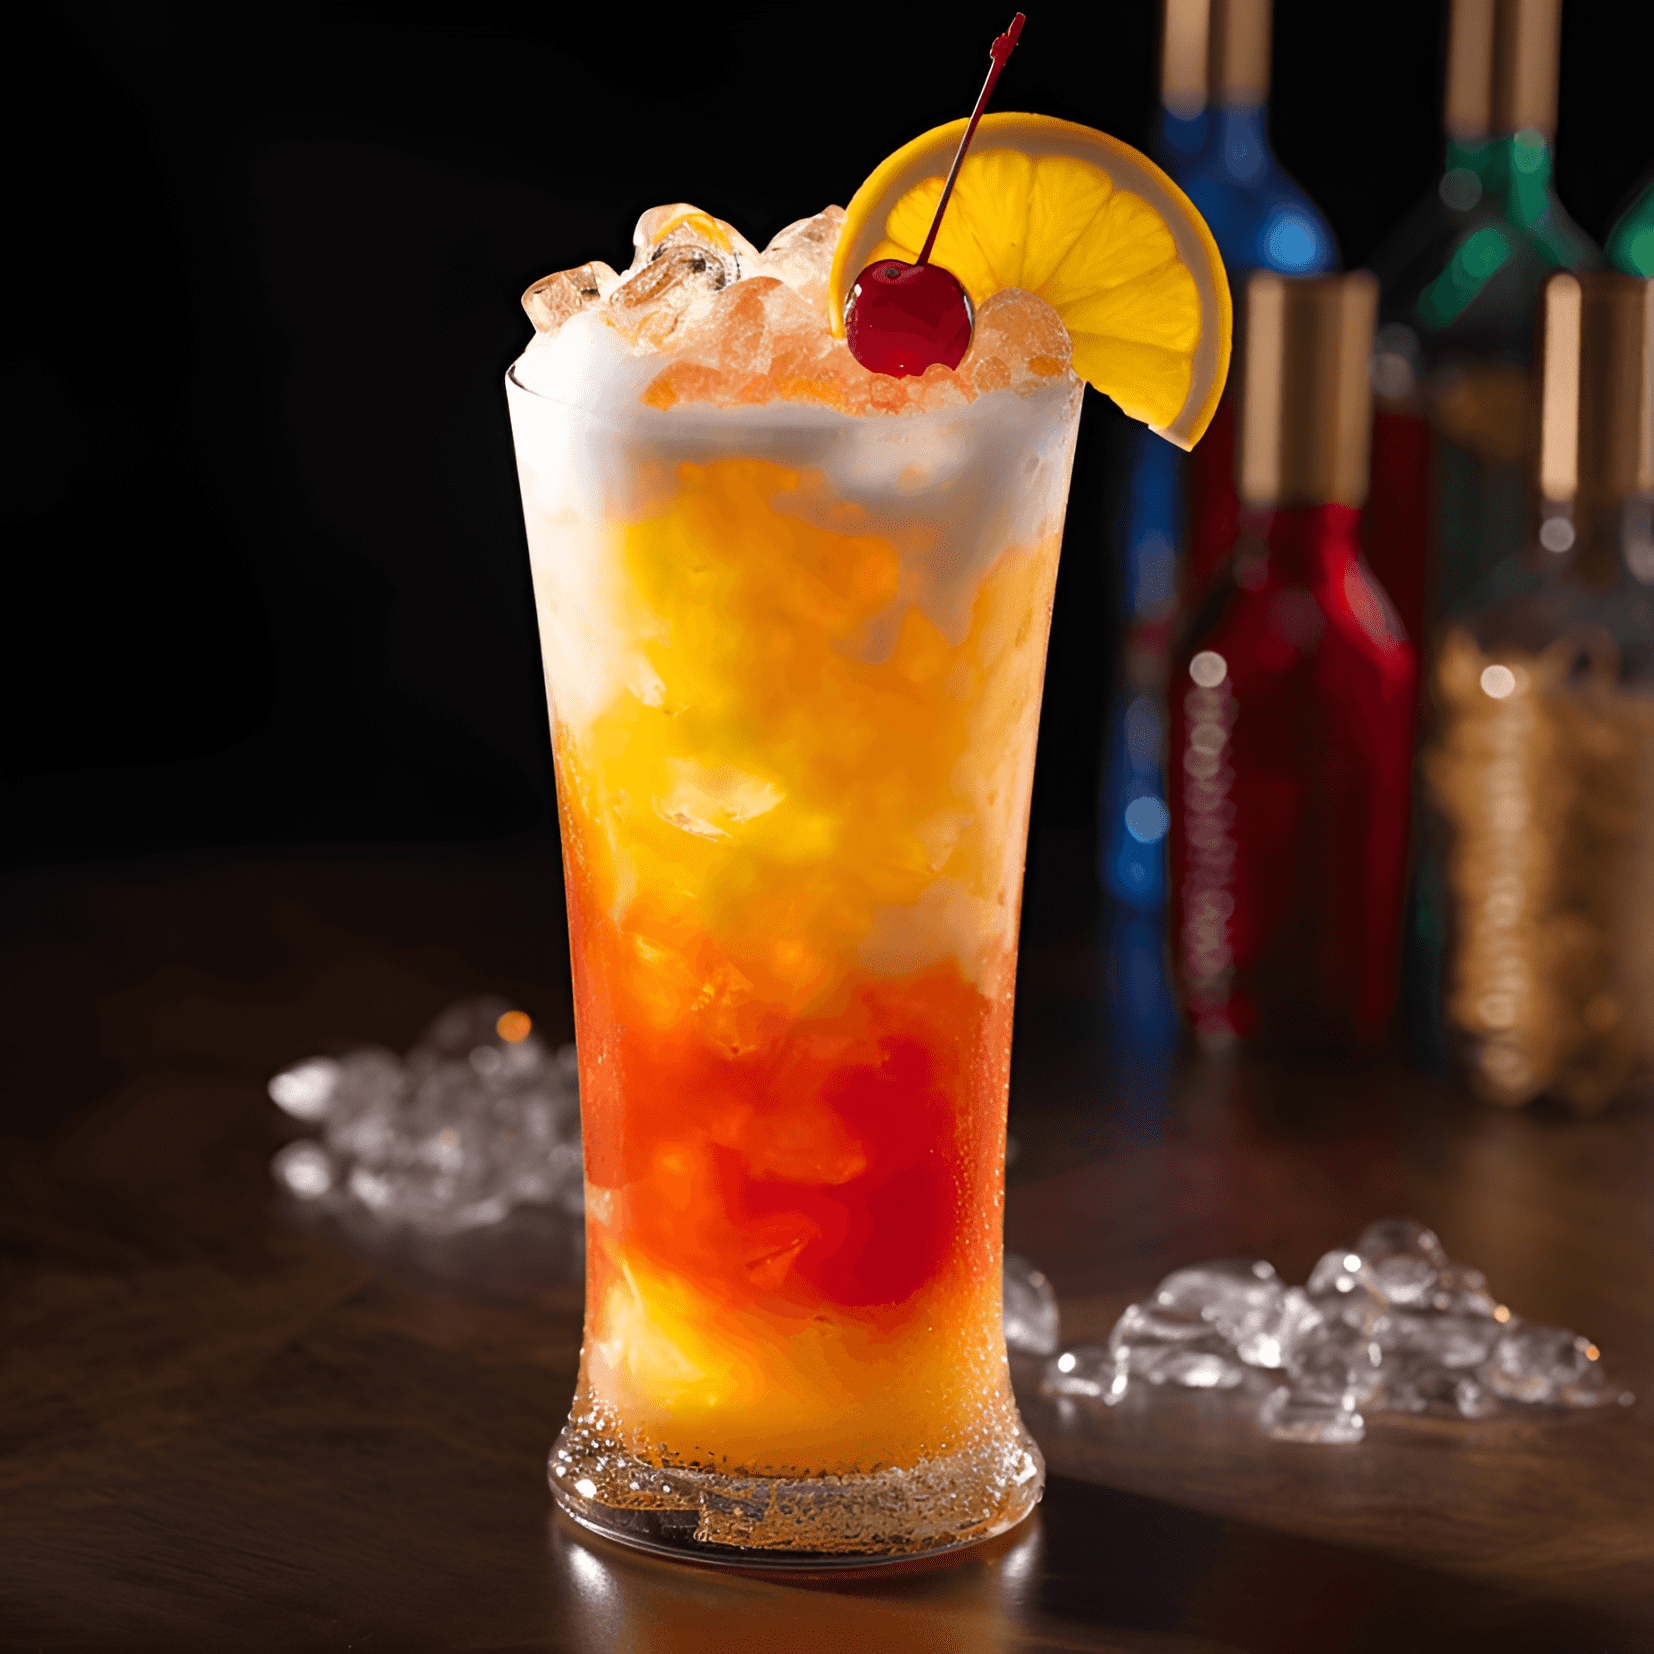 The Rum Runner is a sweet and fruity cocktail with a hint of tartness. Its flavors are a harmonious blend of tropical fruits, with the rum providing a smooth and warming backbone. The drink is both refreshing and satisfying, making it perfect for sipping on a hot summer day.